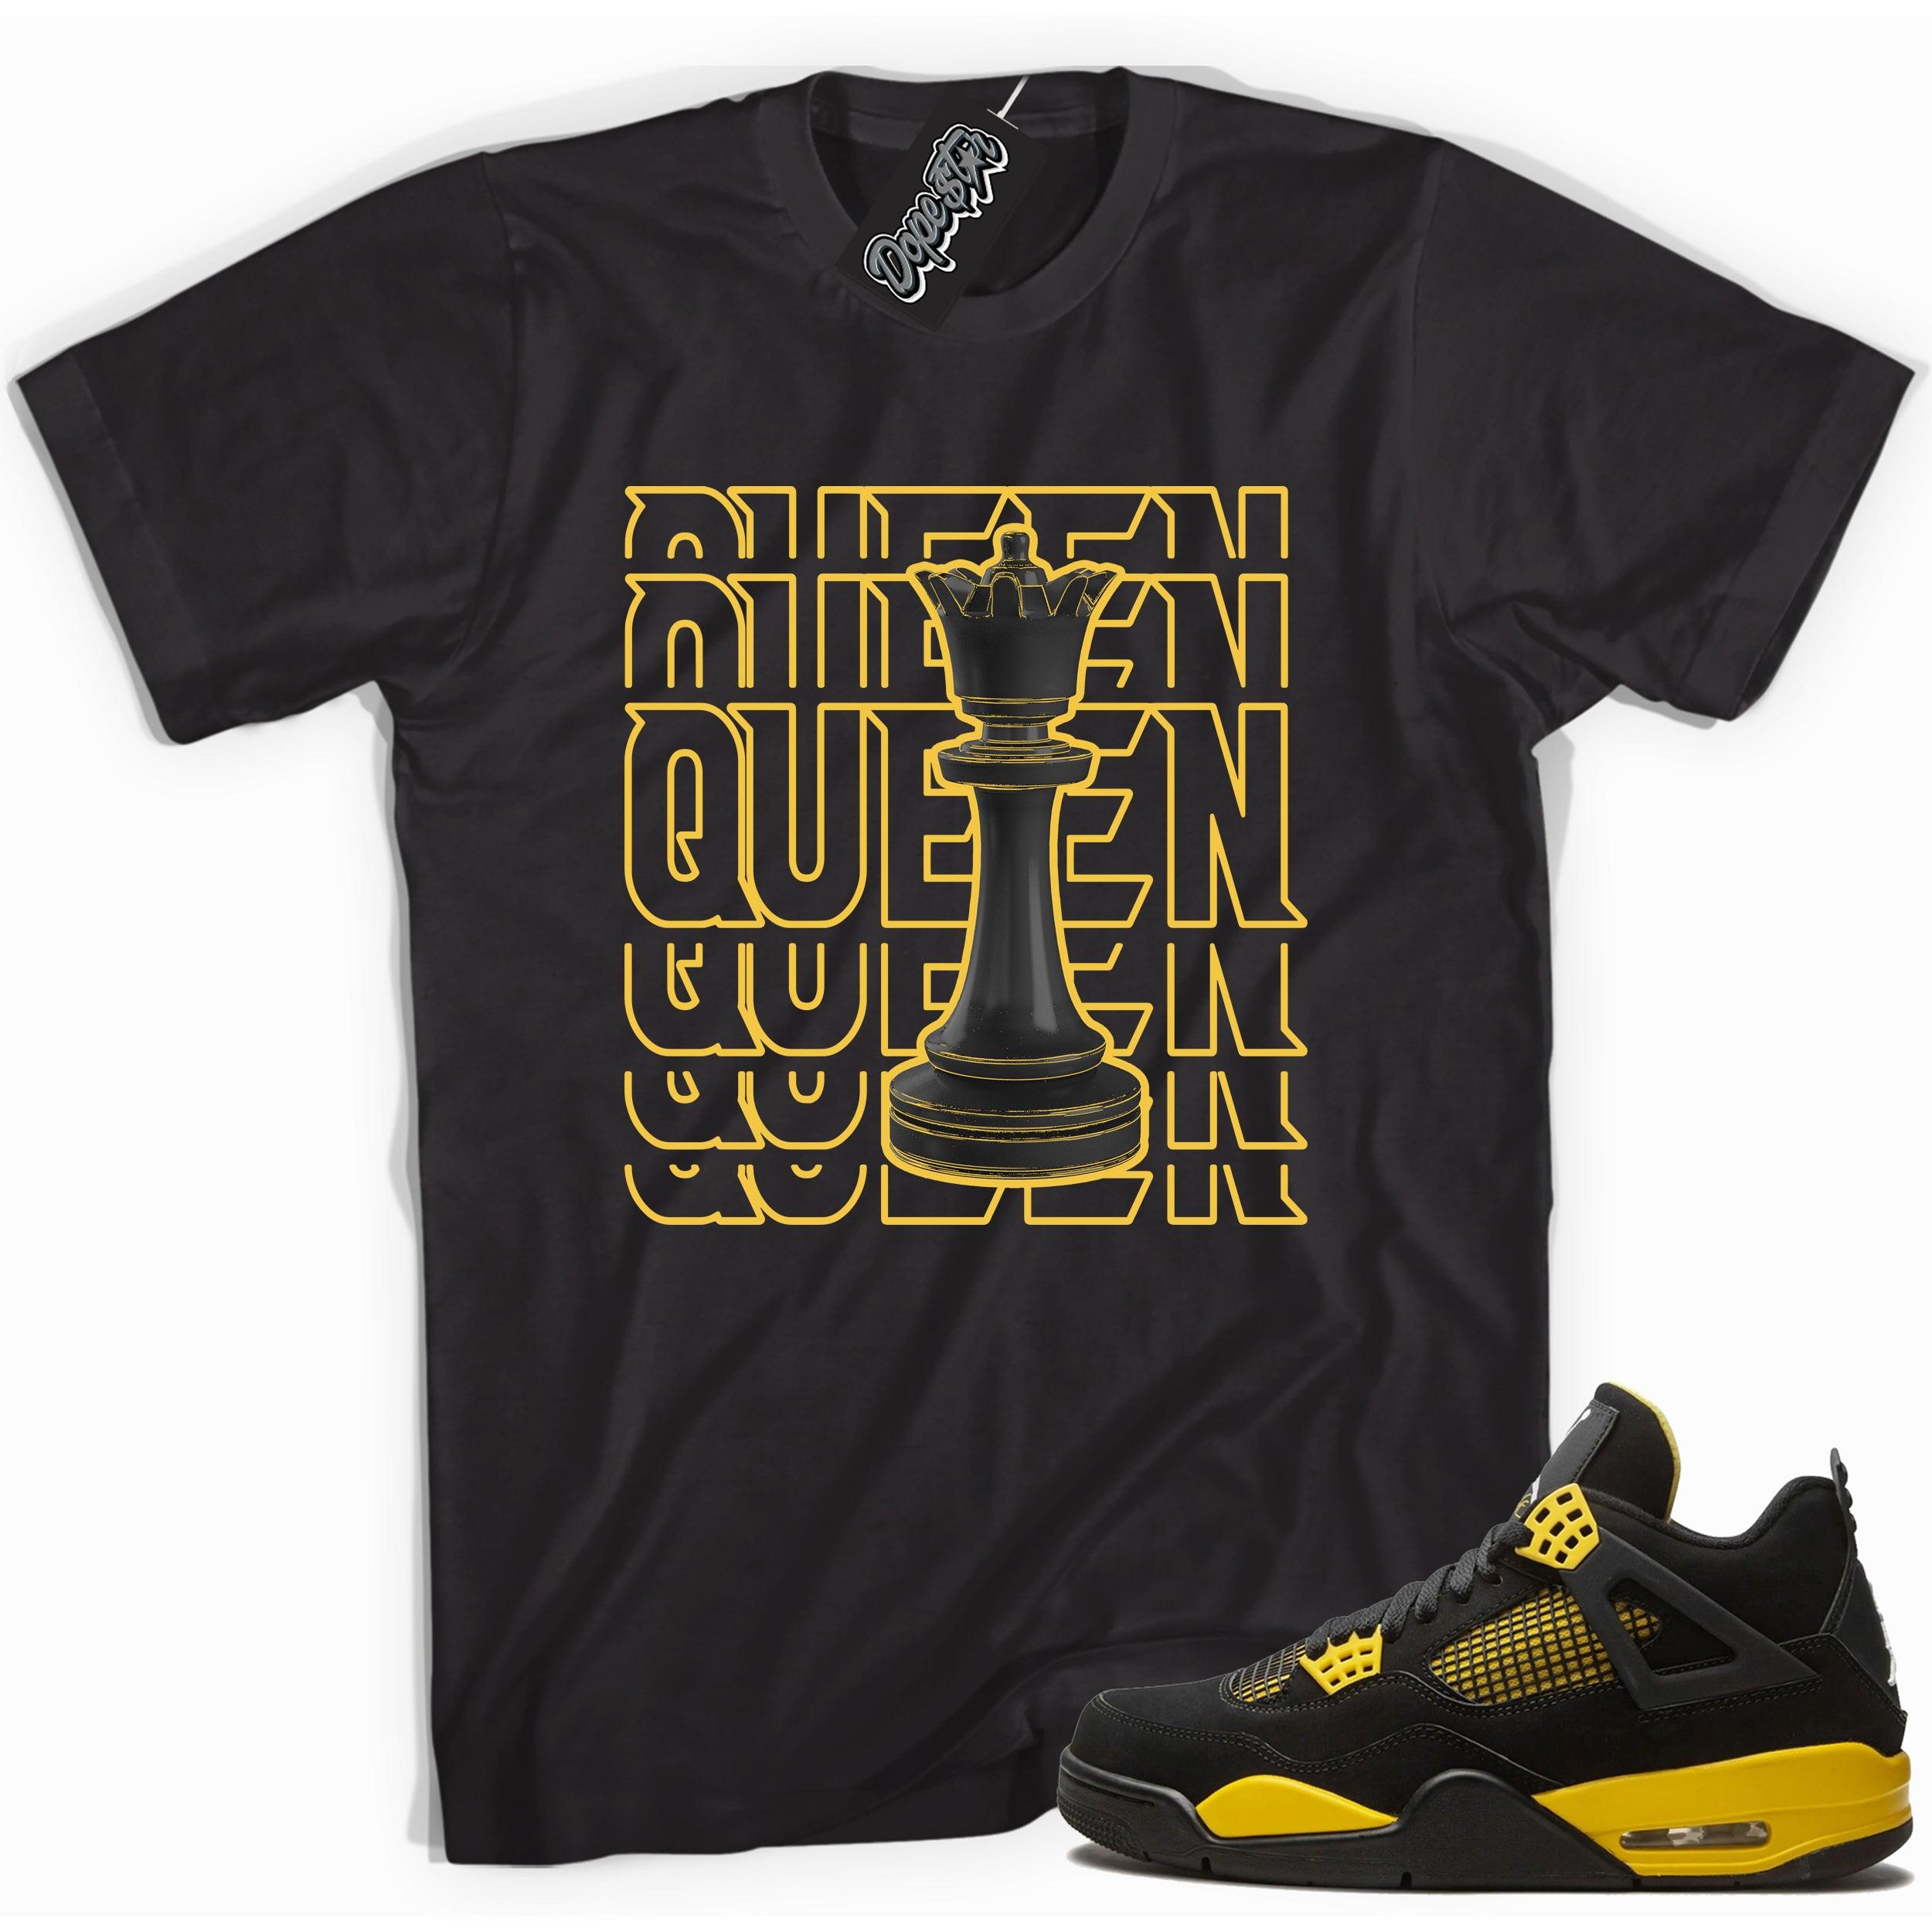 Cool black graphic tee with 'queen' print, that perfectly matches  Air Jordan 4 Thunder sneakers